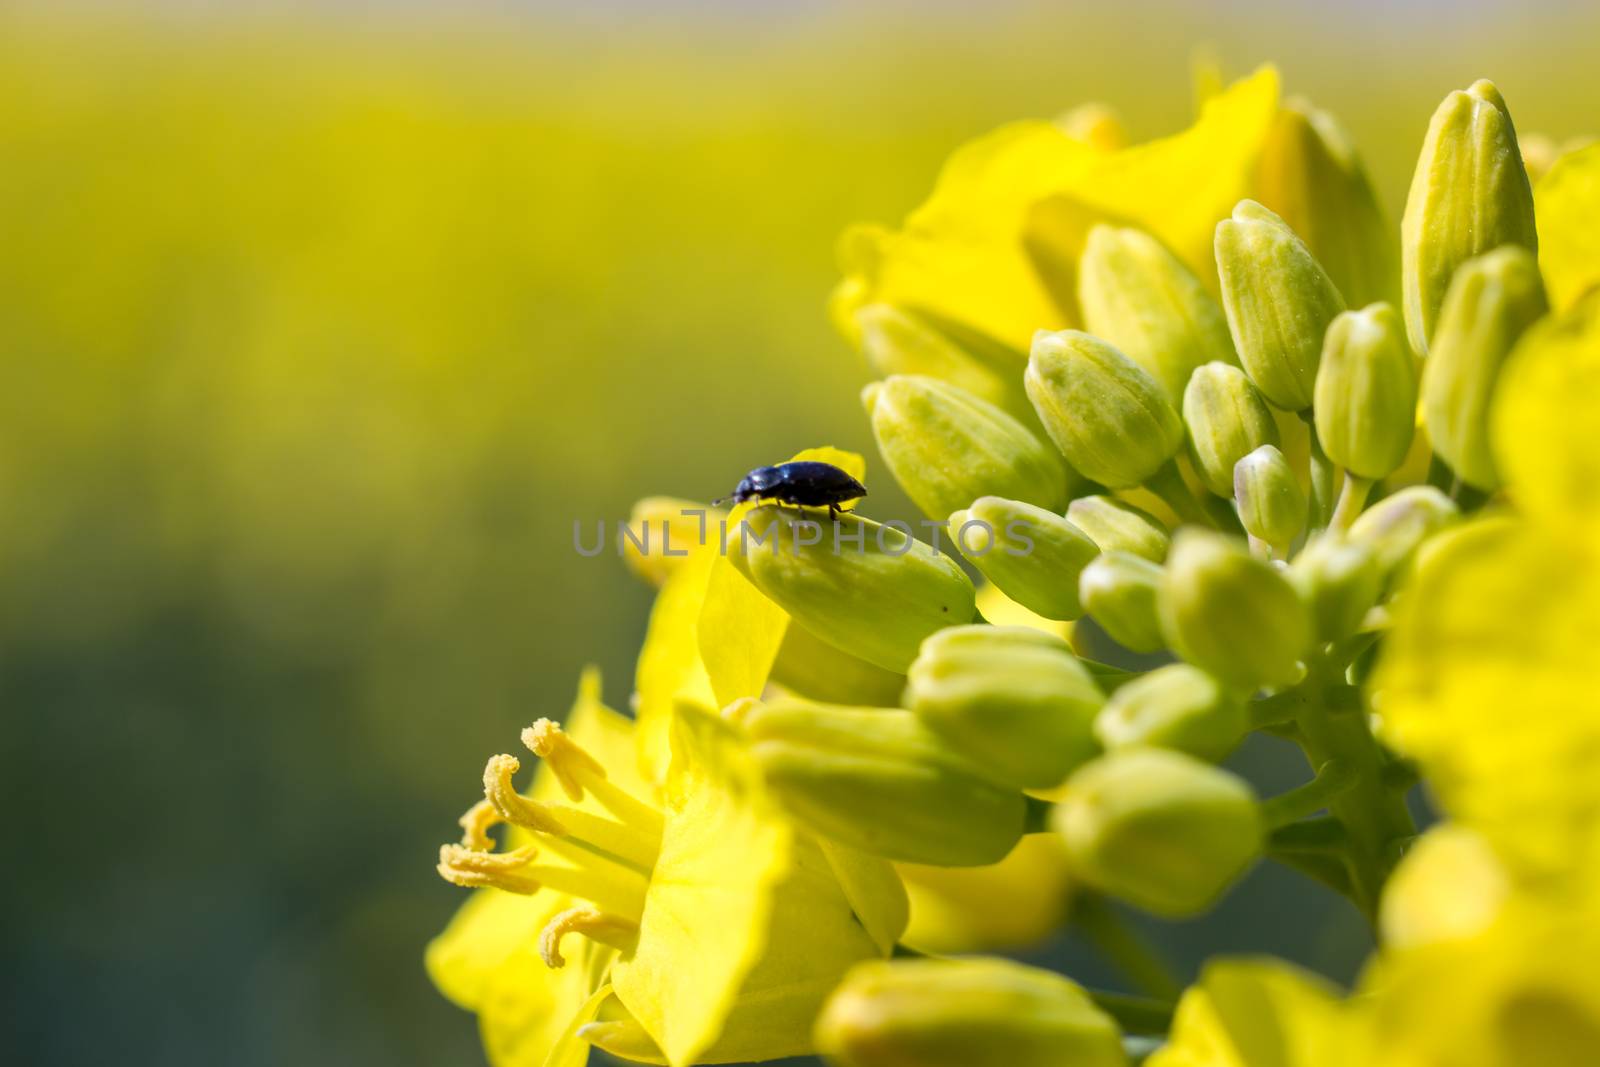 Closeup of a Single beatle on yellow rapeseed flower